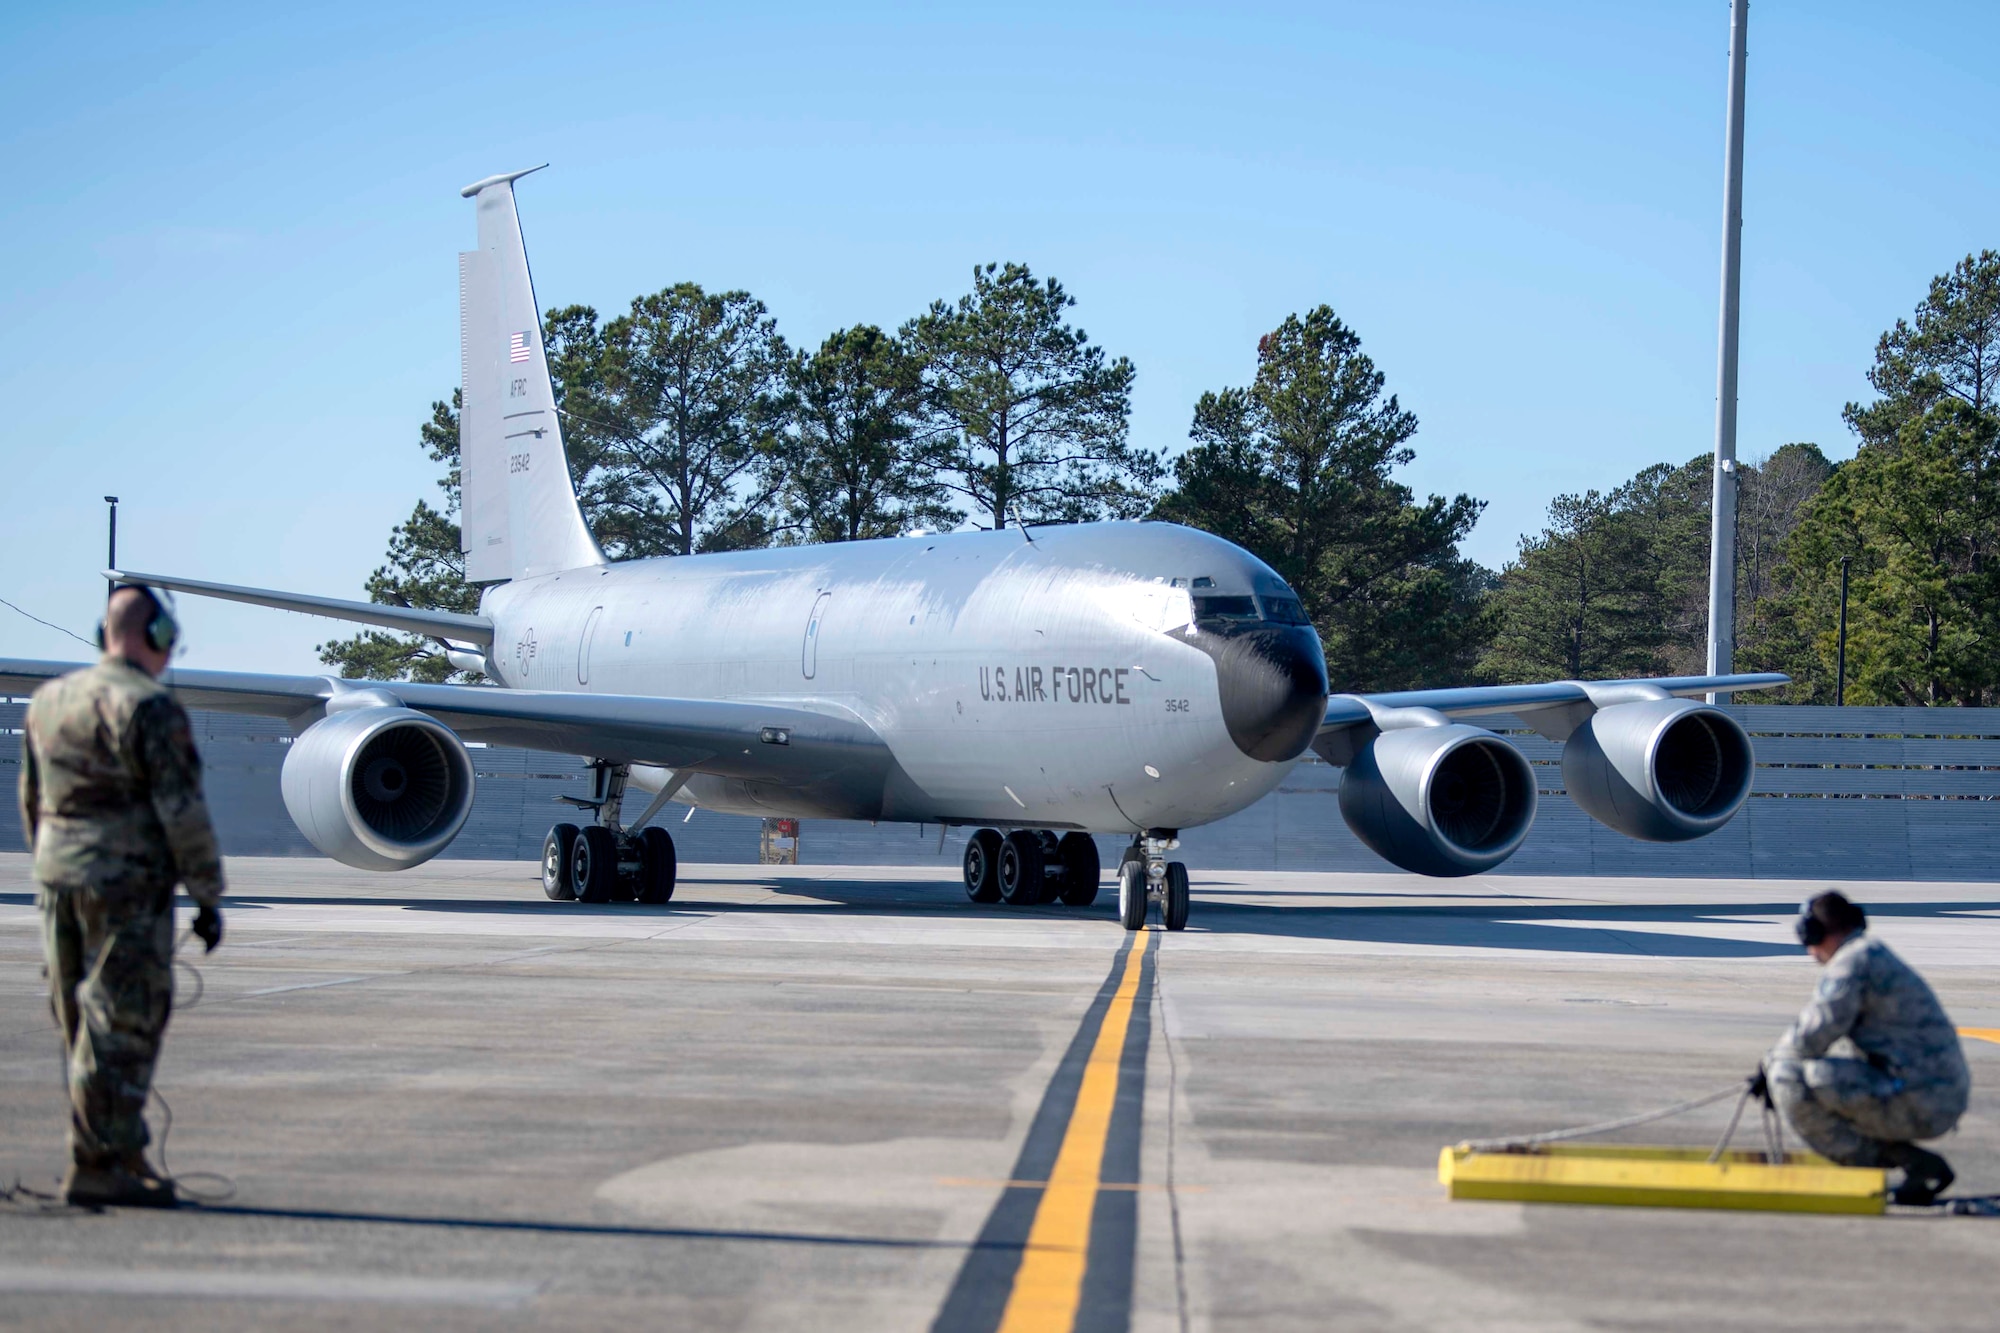 A KC-135 Stratotanker taxis on the flightline on Seymour Johnson Air Force Base, North Carolina, Dec. 16, 2019. The 911th Air Refueling Squadron completed their final mission on a KC-135. (U.S. Air Force photo by Staff Sgt. Mary McKnight)